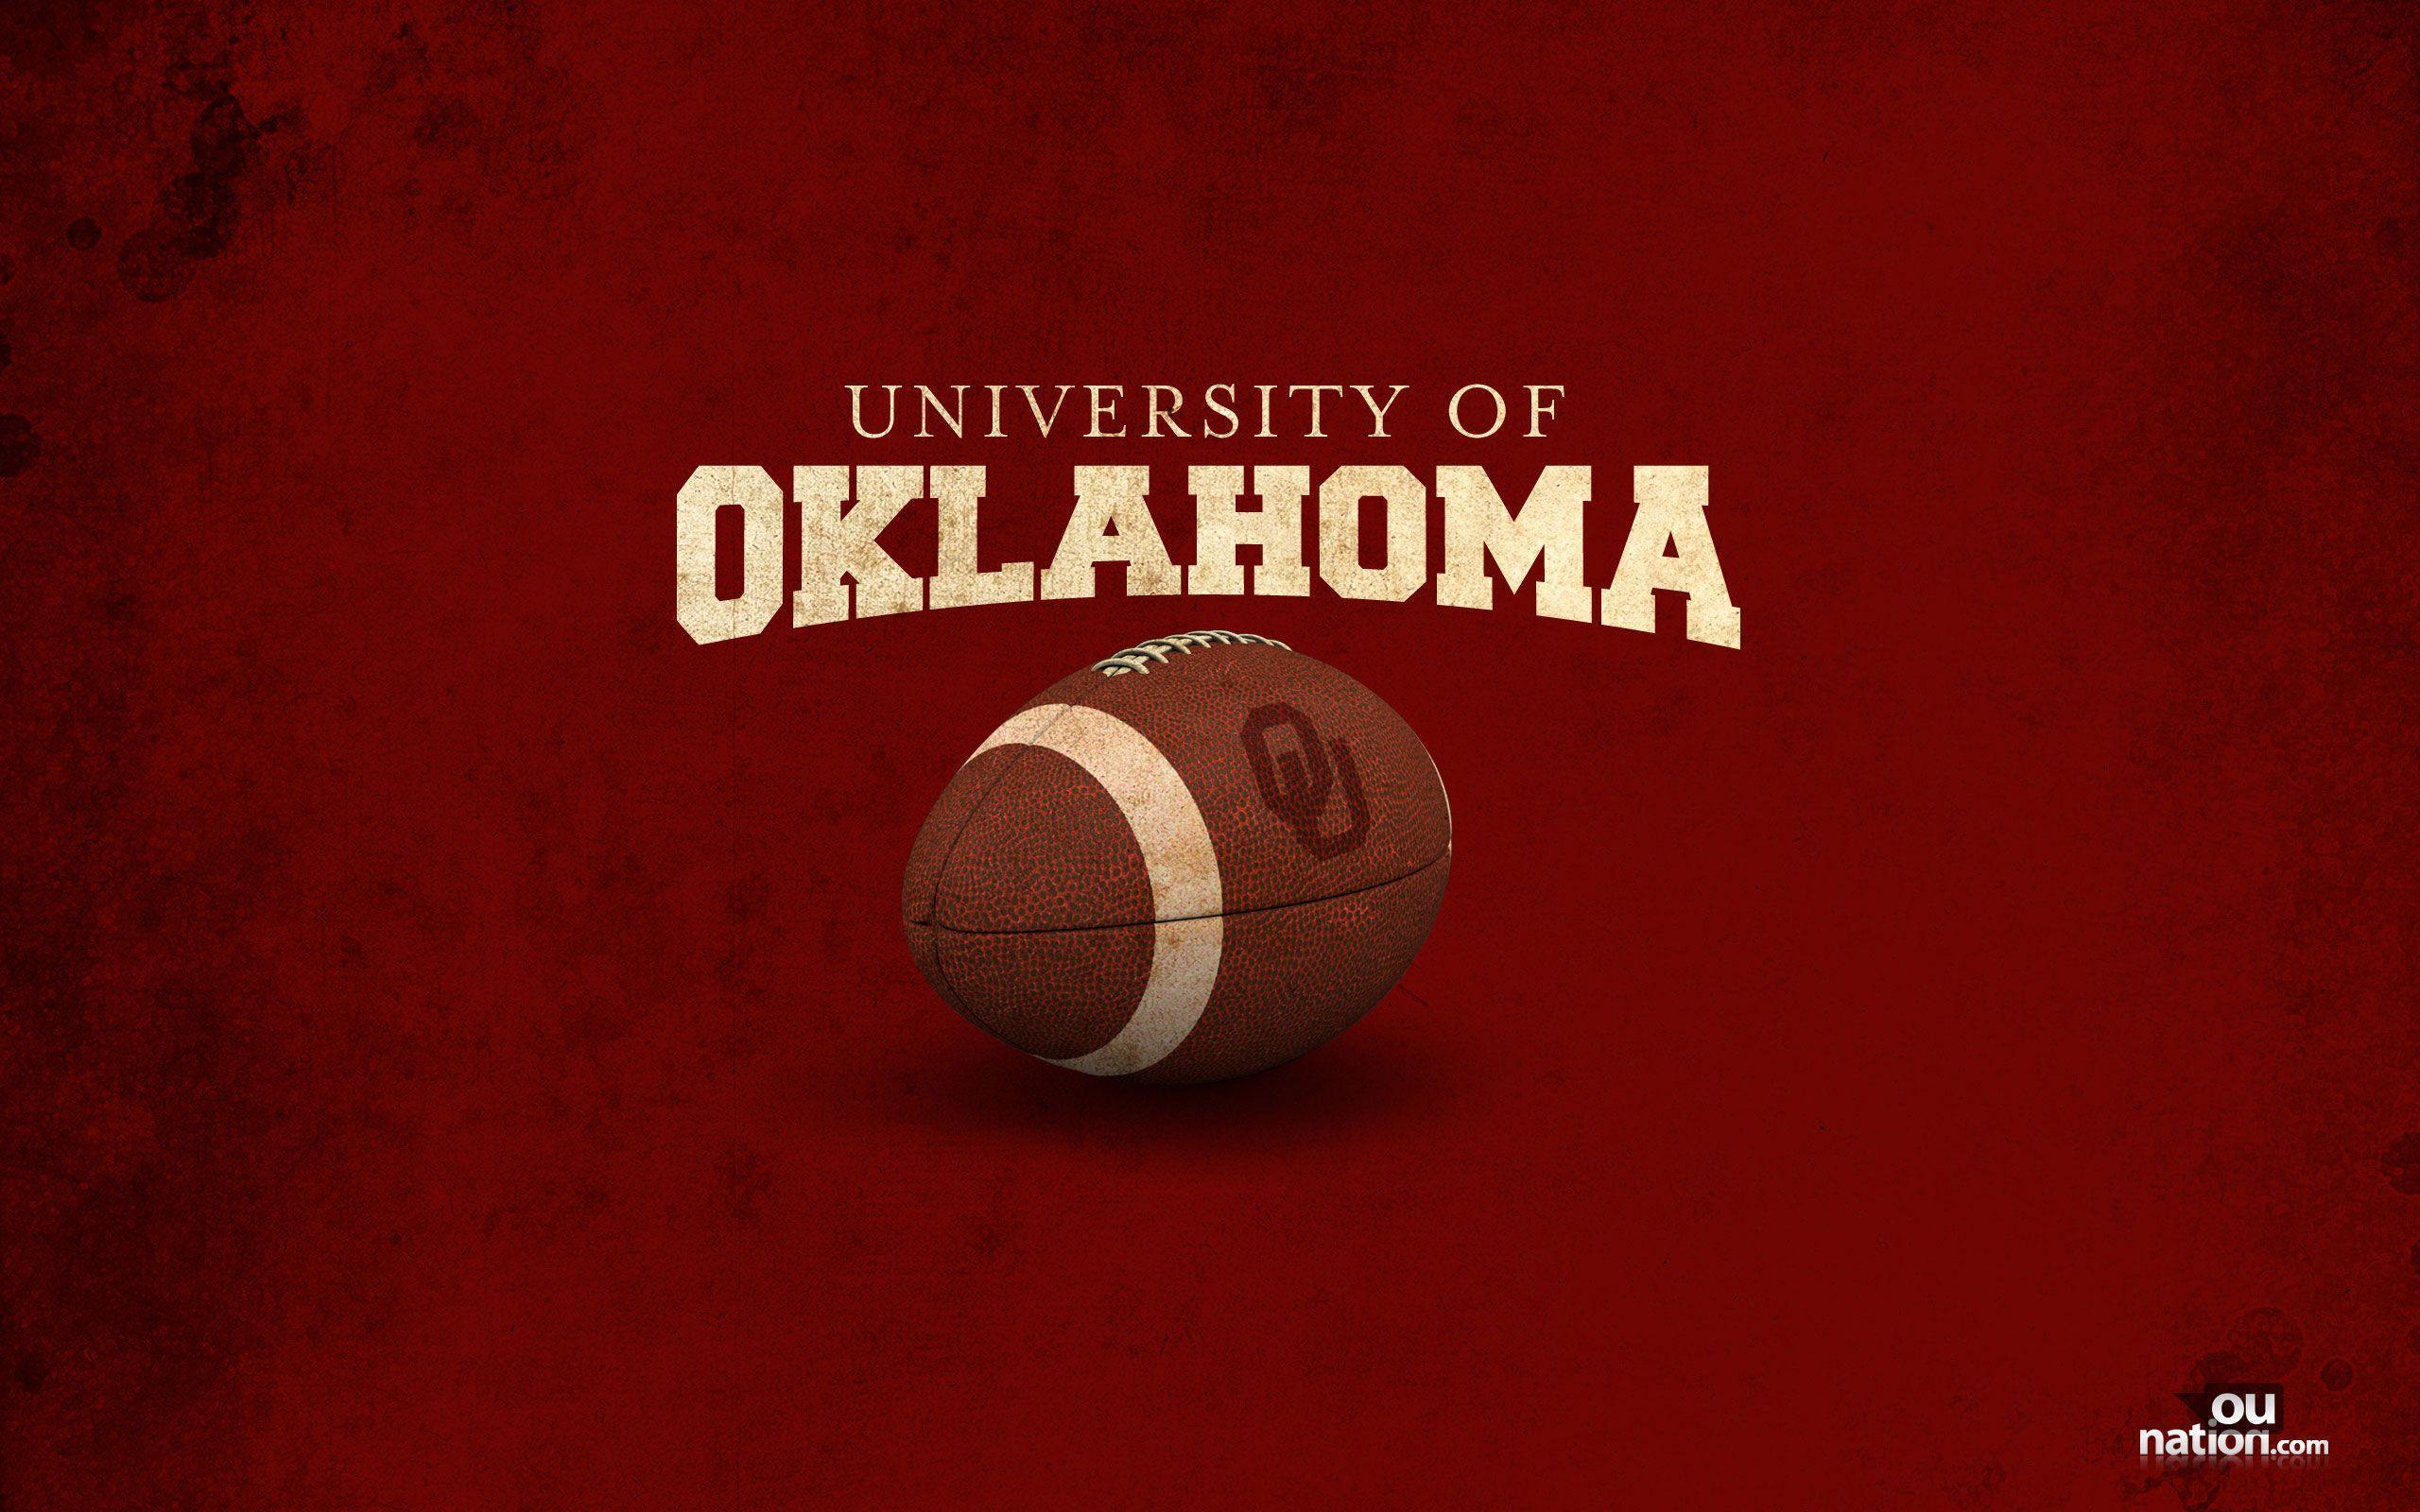 Free download 2016 Oklahoma University Football Schedule Wallpapers